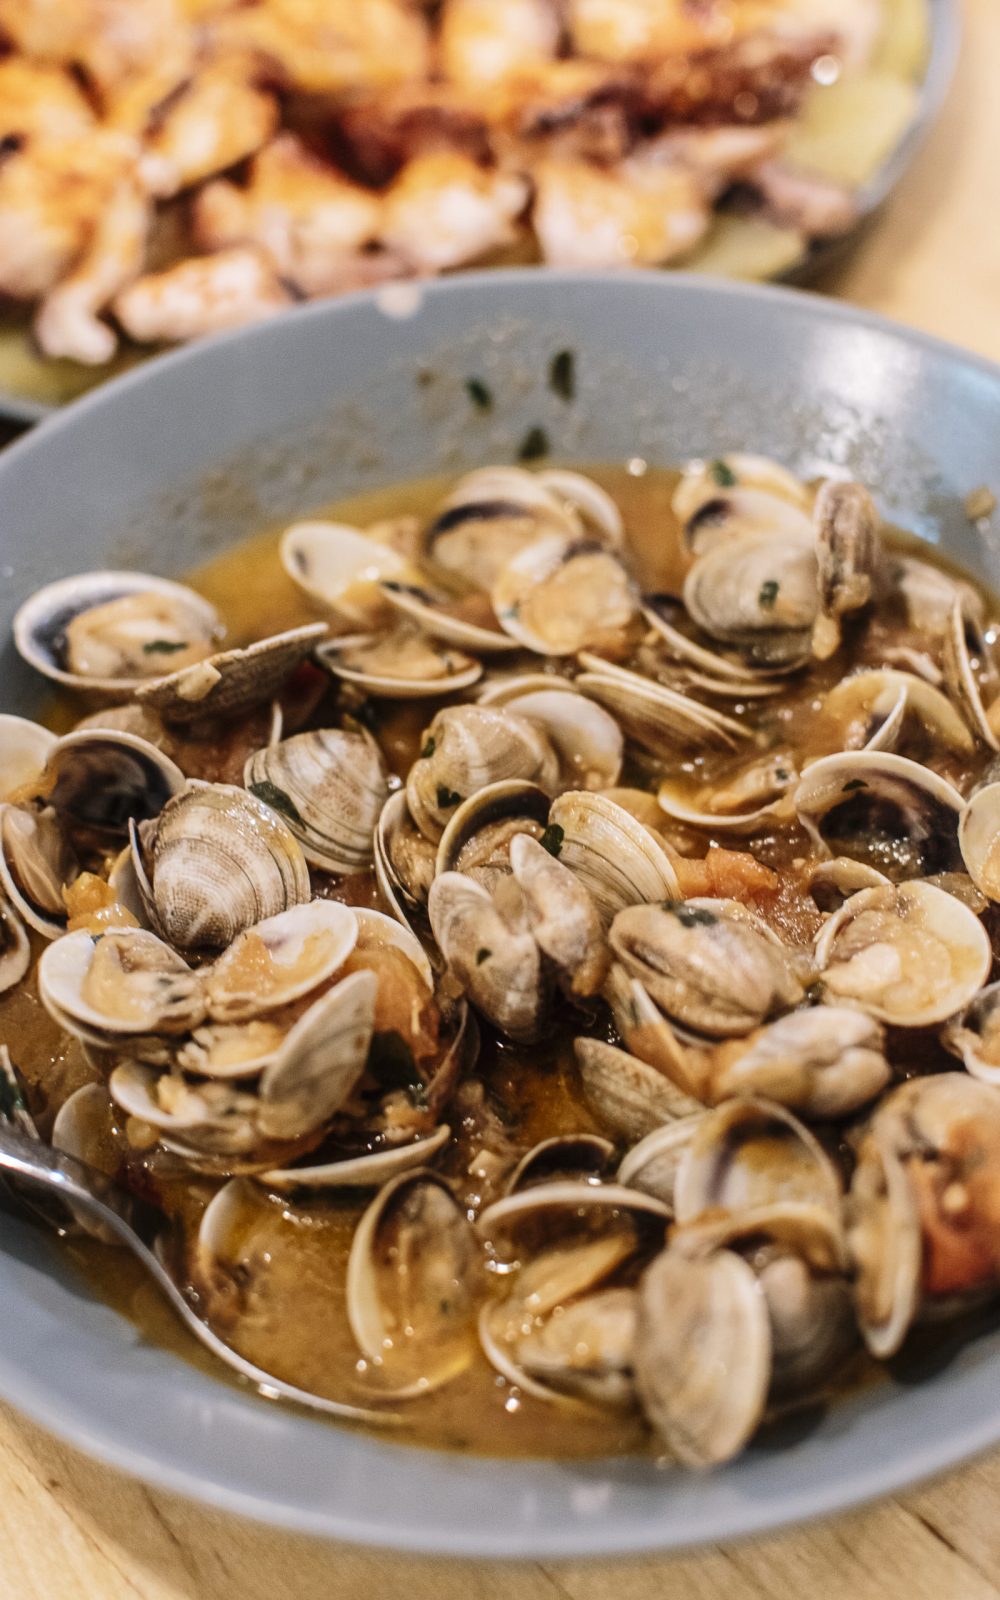 Clams cooked in sauce served in a deep plate.